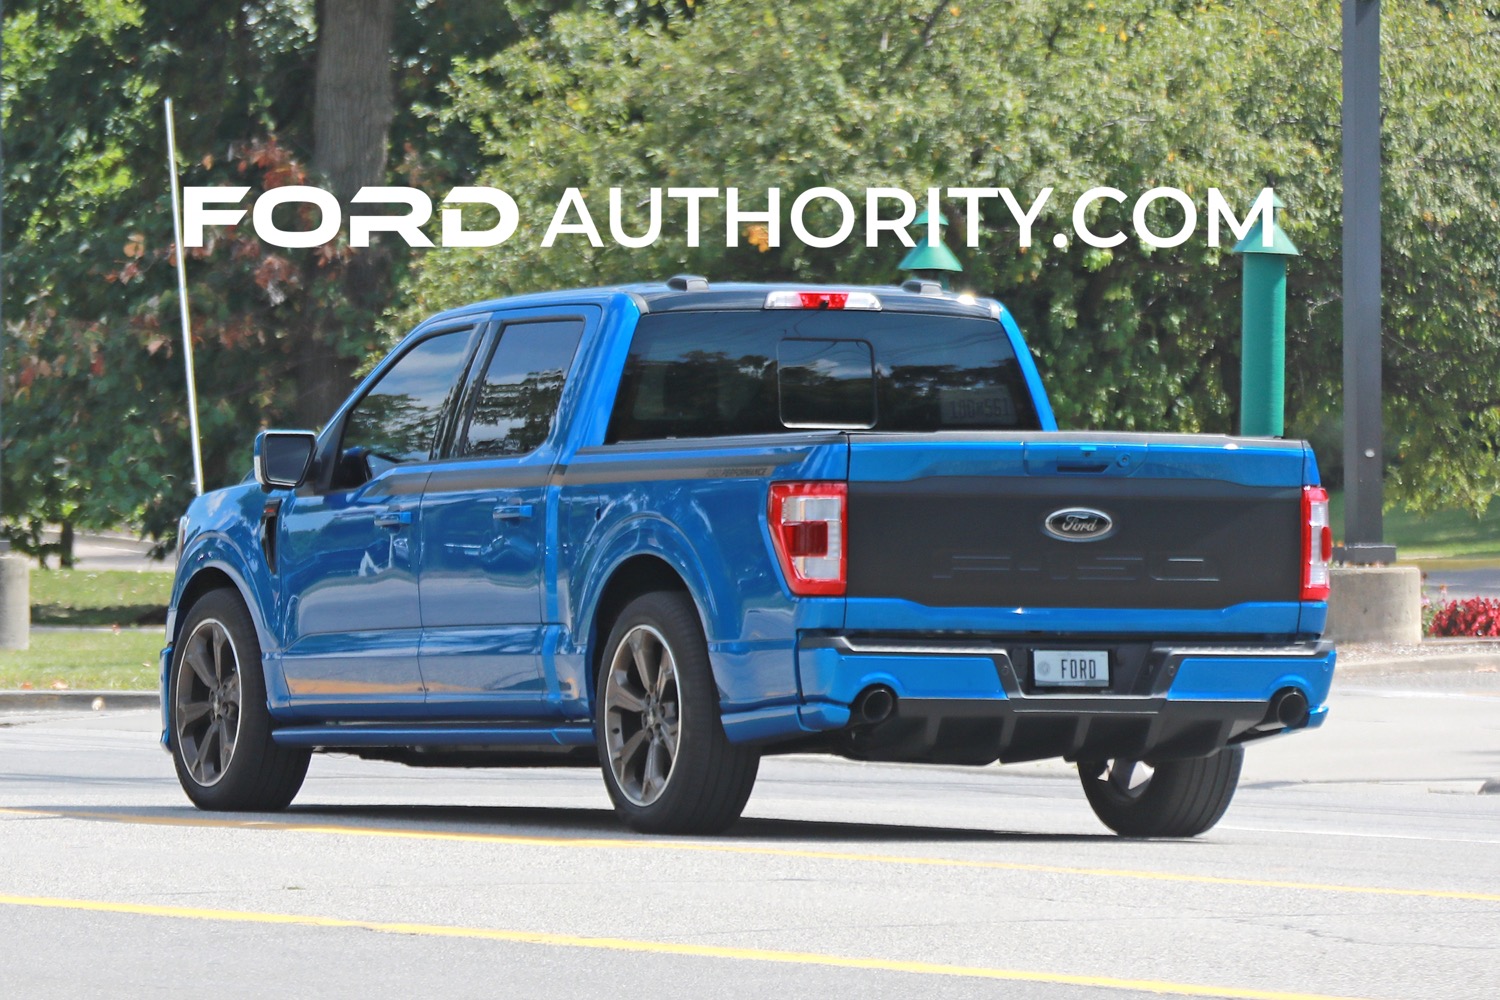 2023 Ford F-150 With 5.0L V8 Gets New 700-HP Performance Kit From